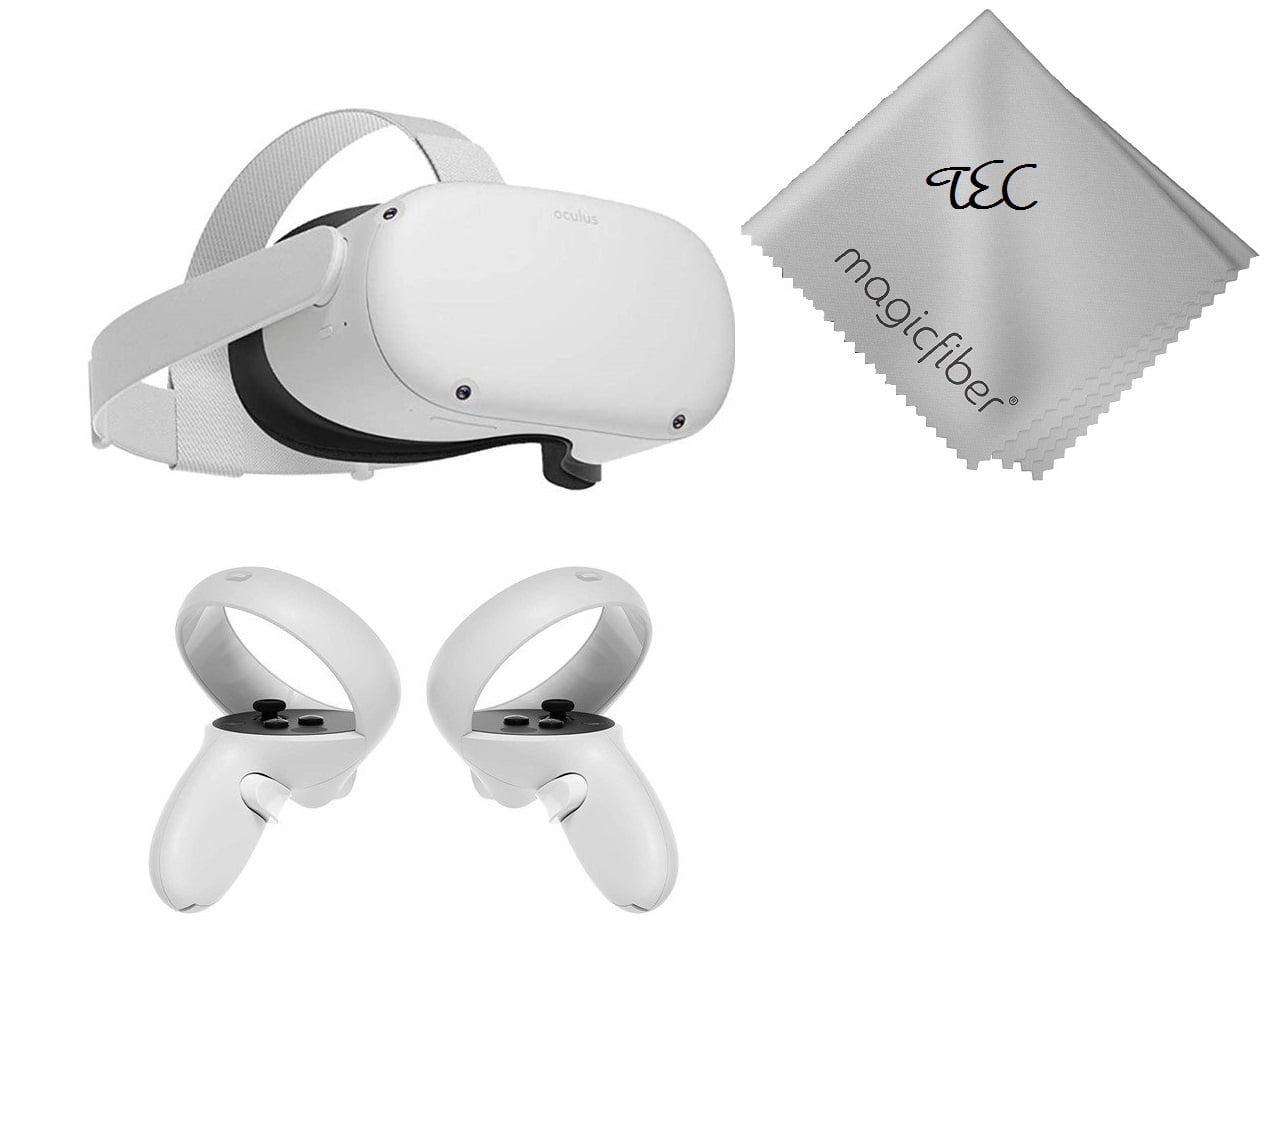 Lav aftensmad Tænke alliance Open Box)TEC Oculus Quest 2 64gb--Advanced All-In-One Virtual Reality  Headset - Walmart.com